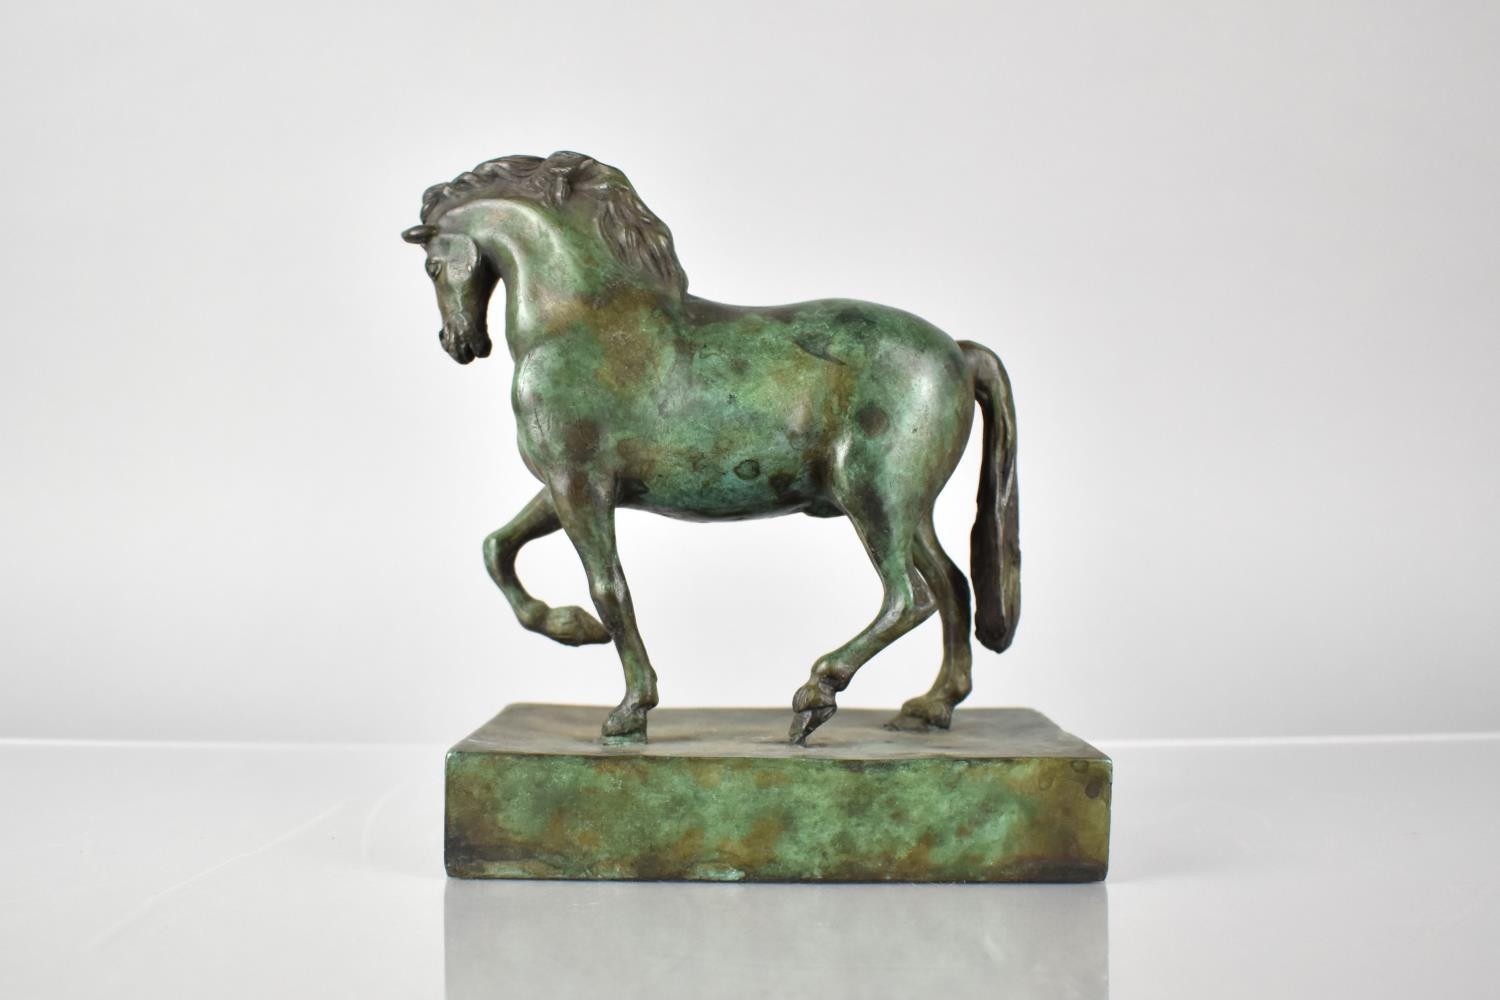 A Grand Tour Souvenir in Green Patinated Bronze, The Horse After Antonio Canova, Rectangular - Image 3 of 3